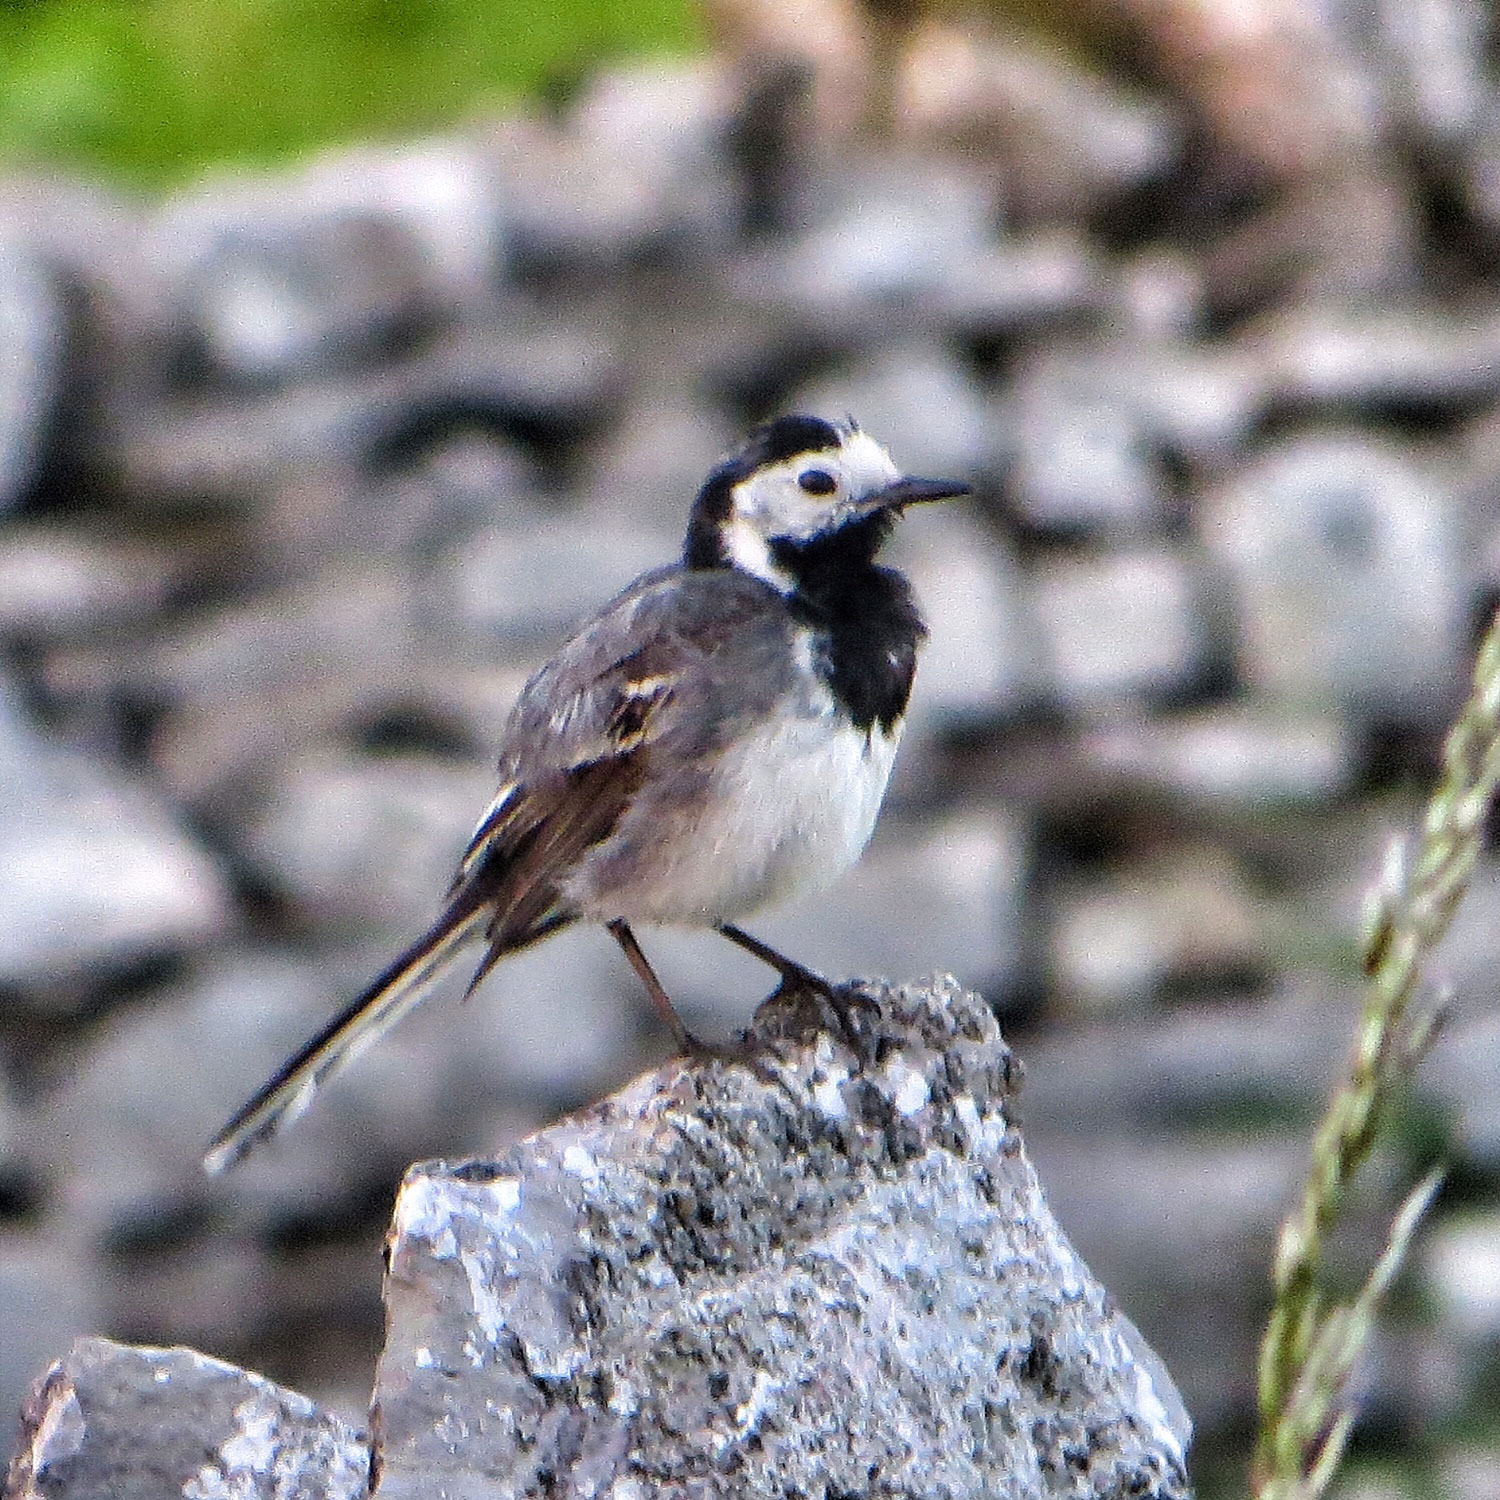 A cheeky wagtail captured on Waitby's wall